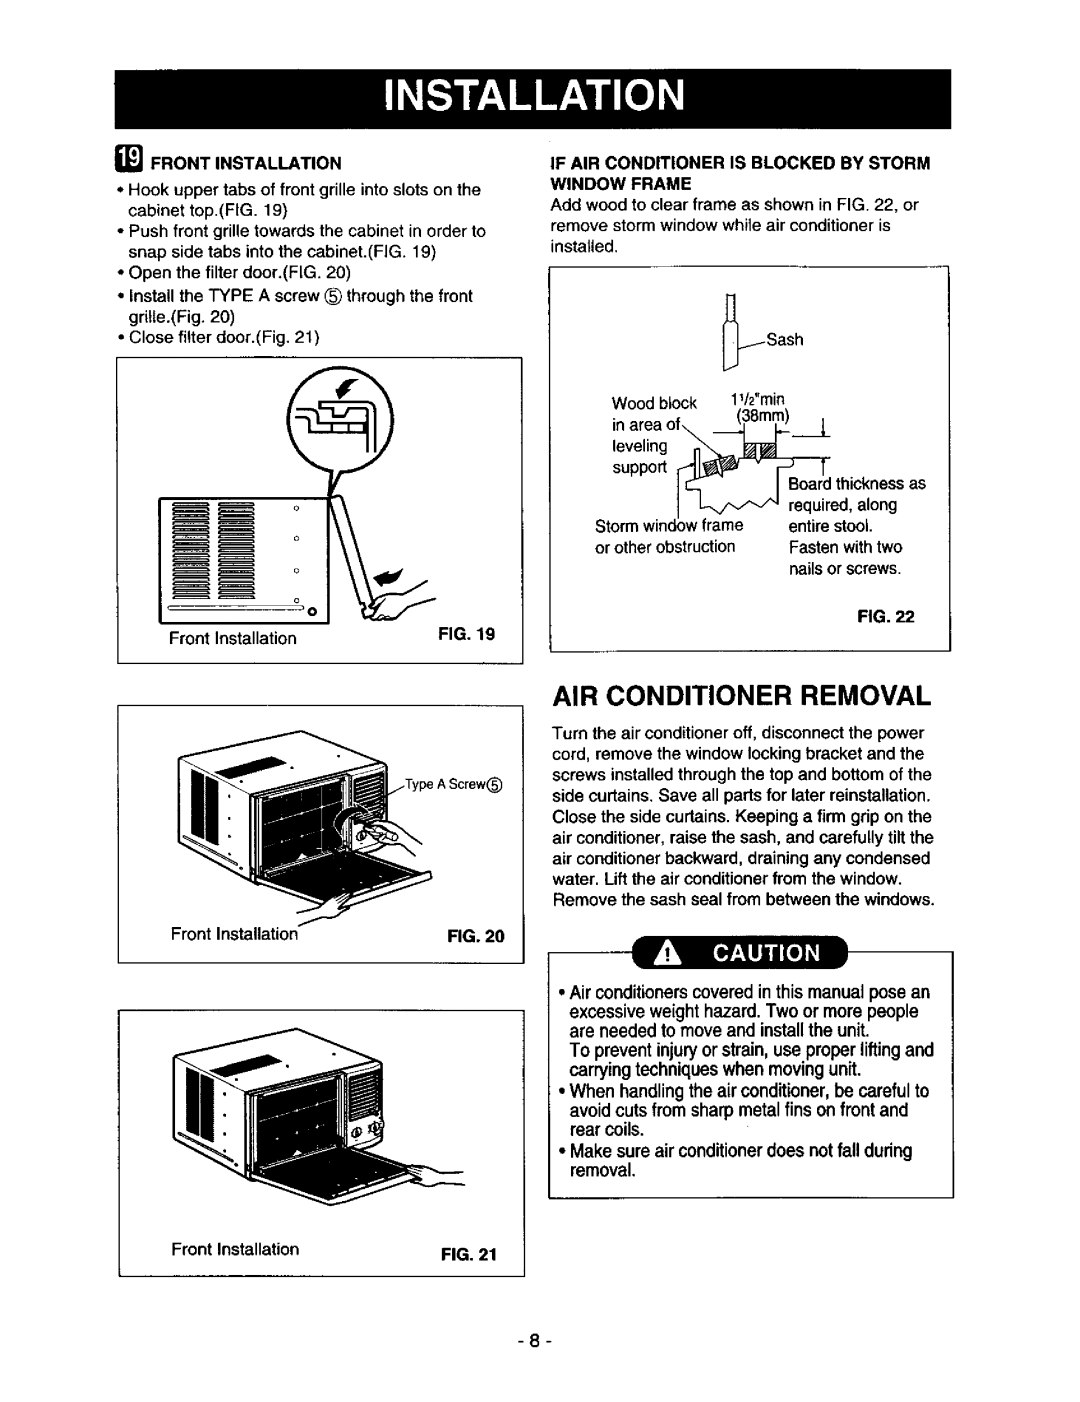 Kenmore 78122 owner manual Air Conditioner Removal, support _lLt_ r_ T 